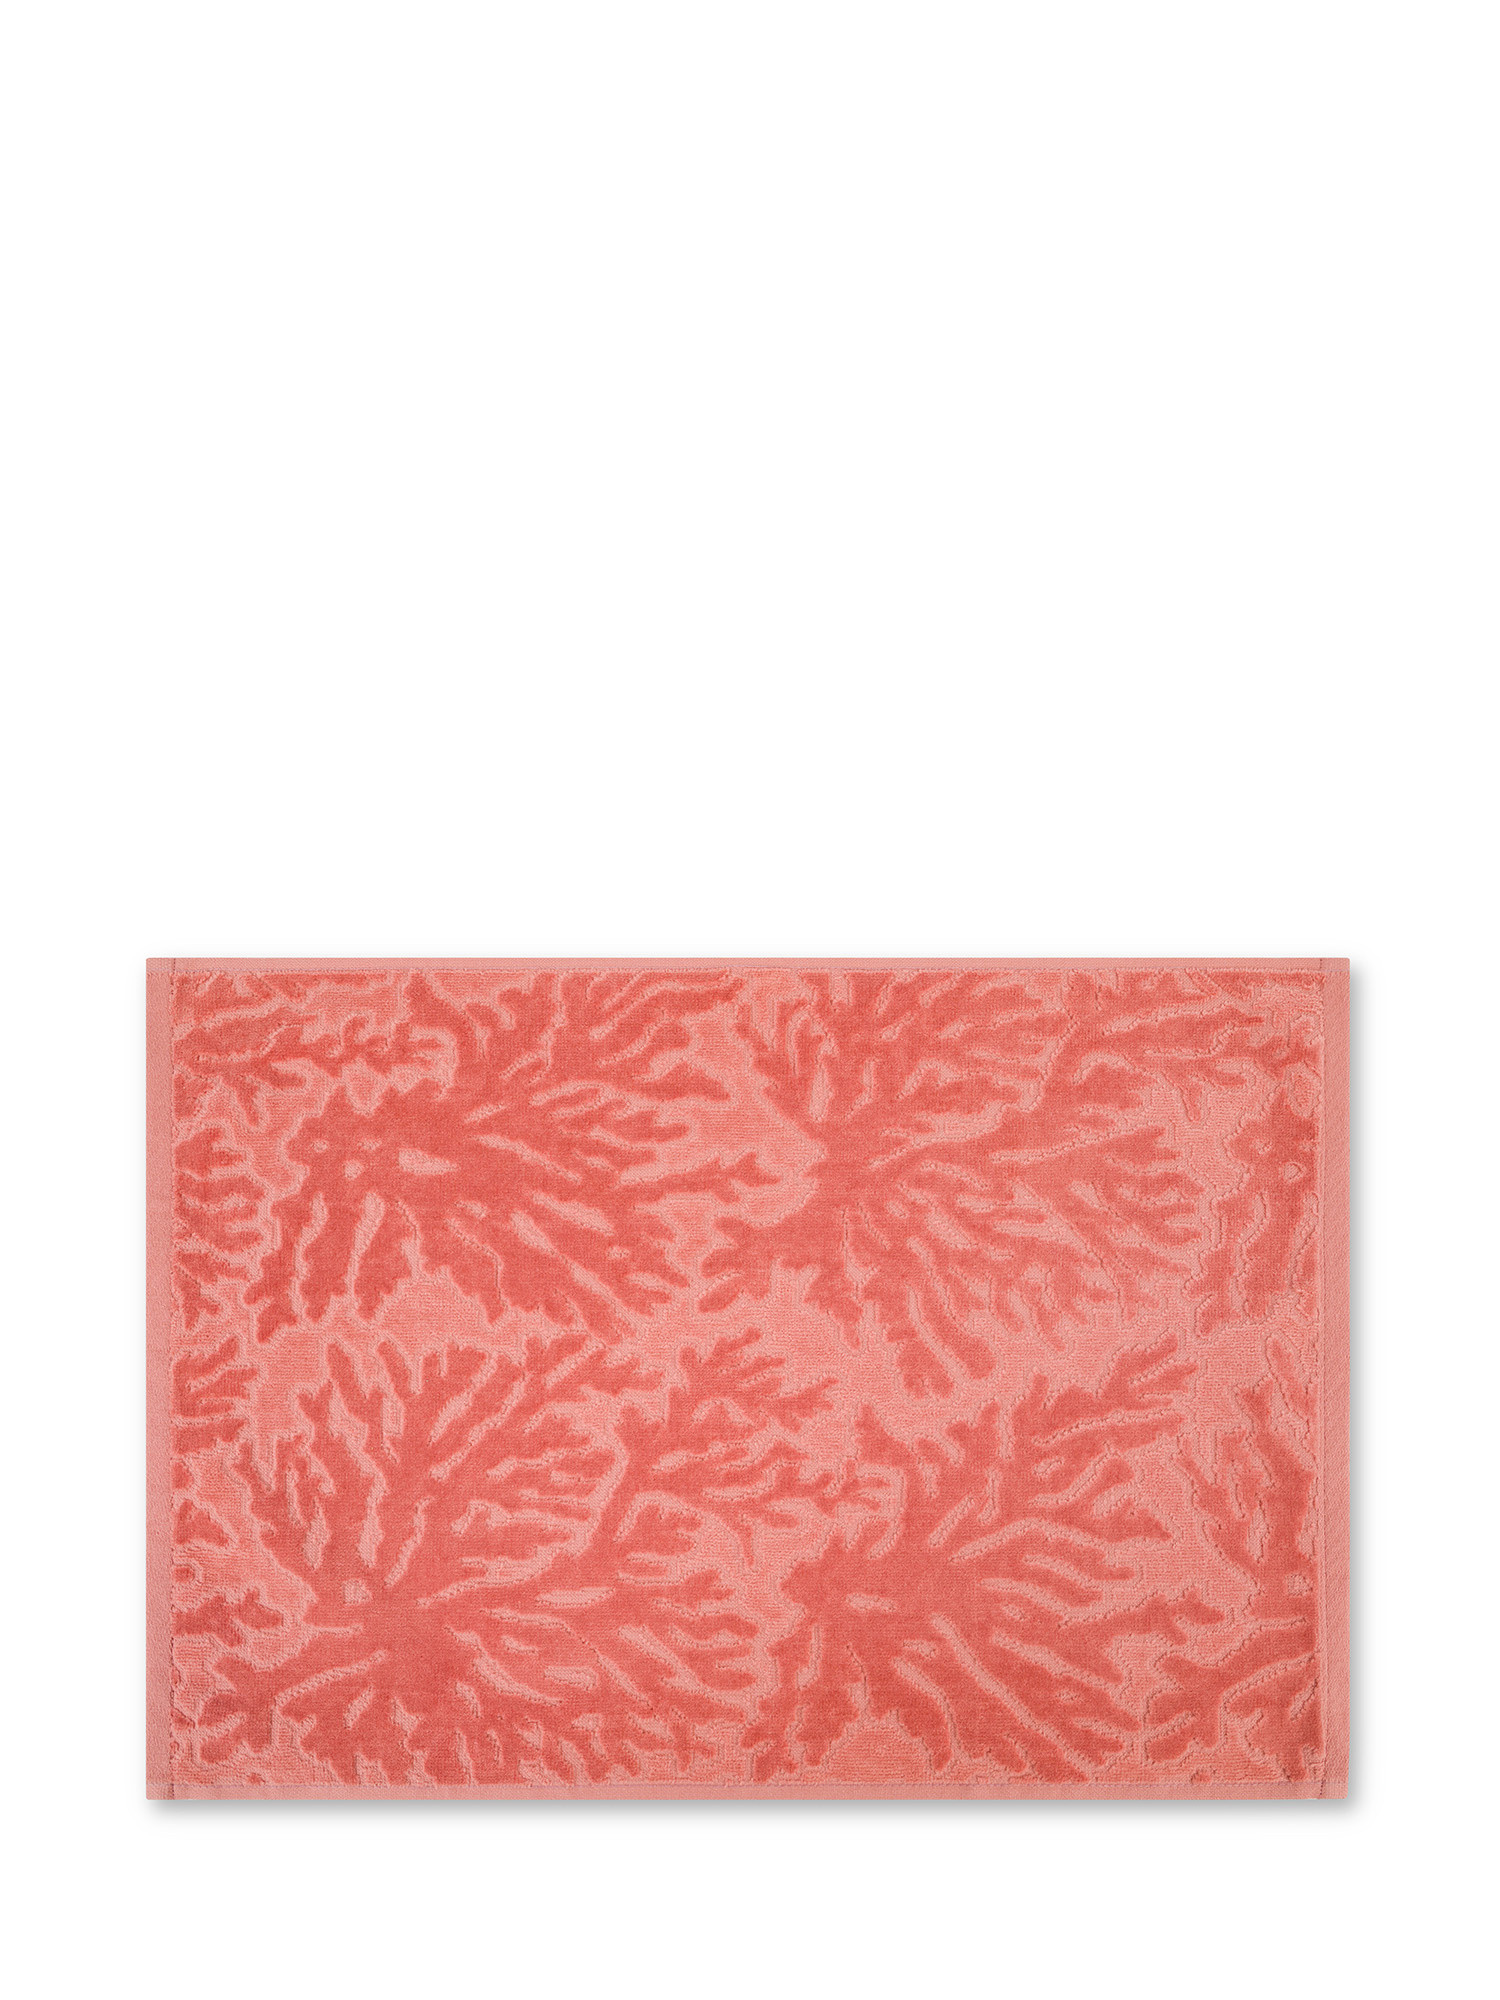 Velor cotton towel with raised floral pattern, Pink, large image number 1